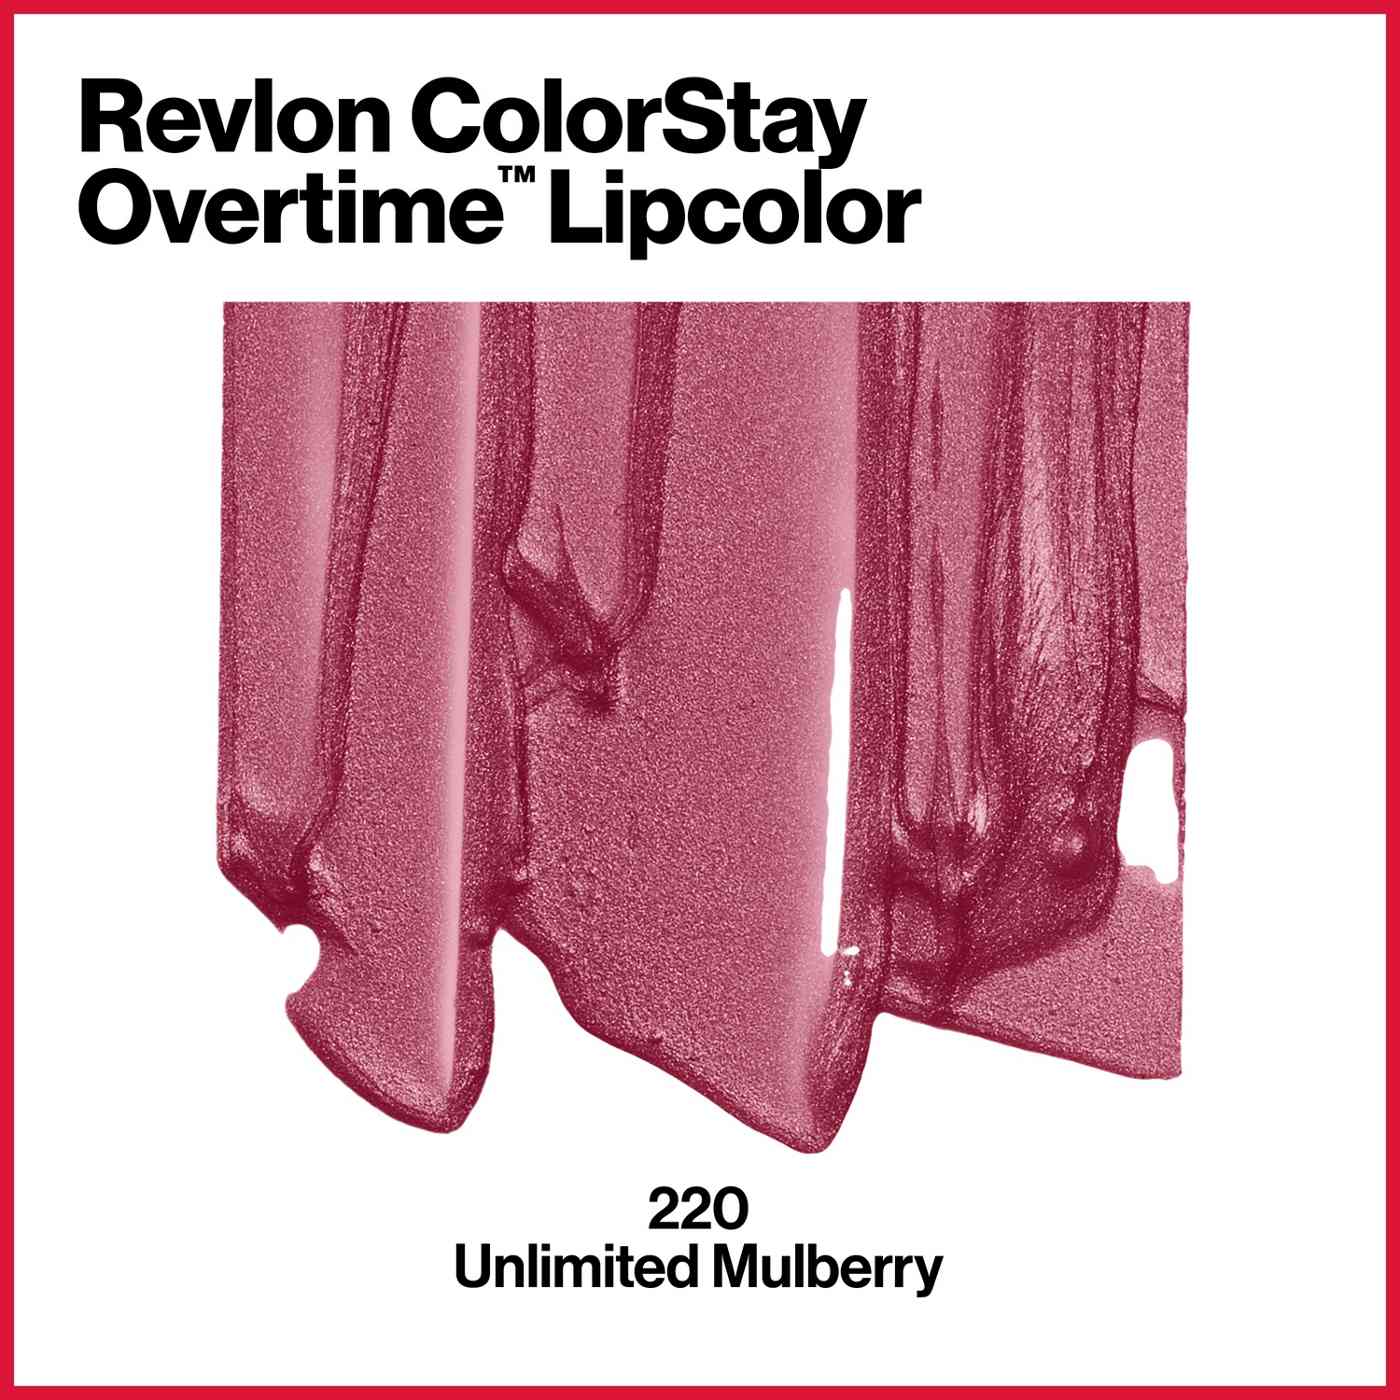 Revlon ColorStay Overtime Lipcolor, Long Wearing Liquid Lipstick, 220 Unlimited Mulberry; image 6 of 7